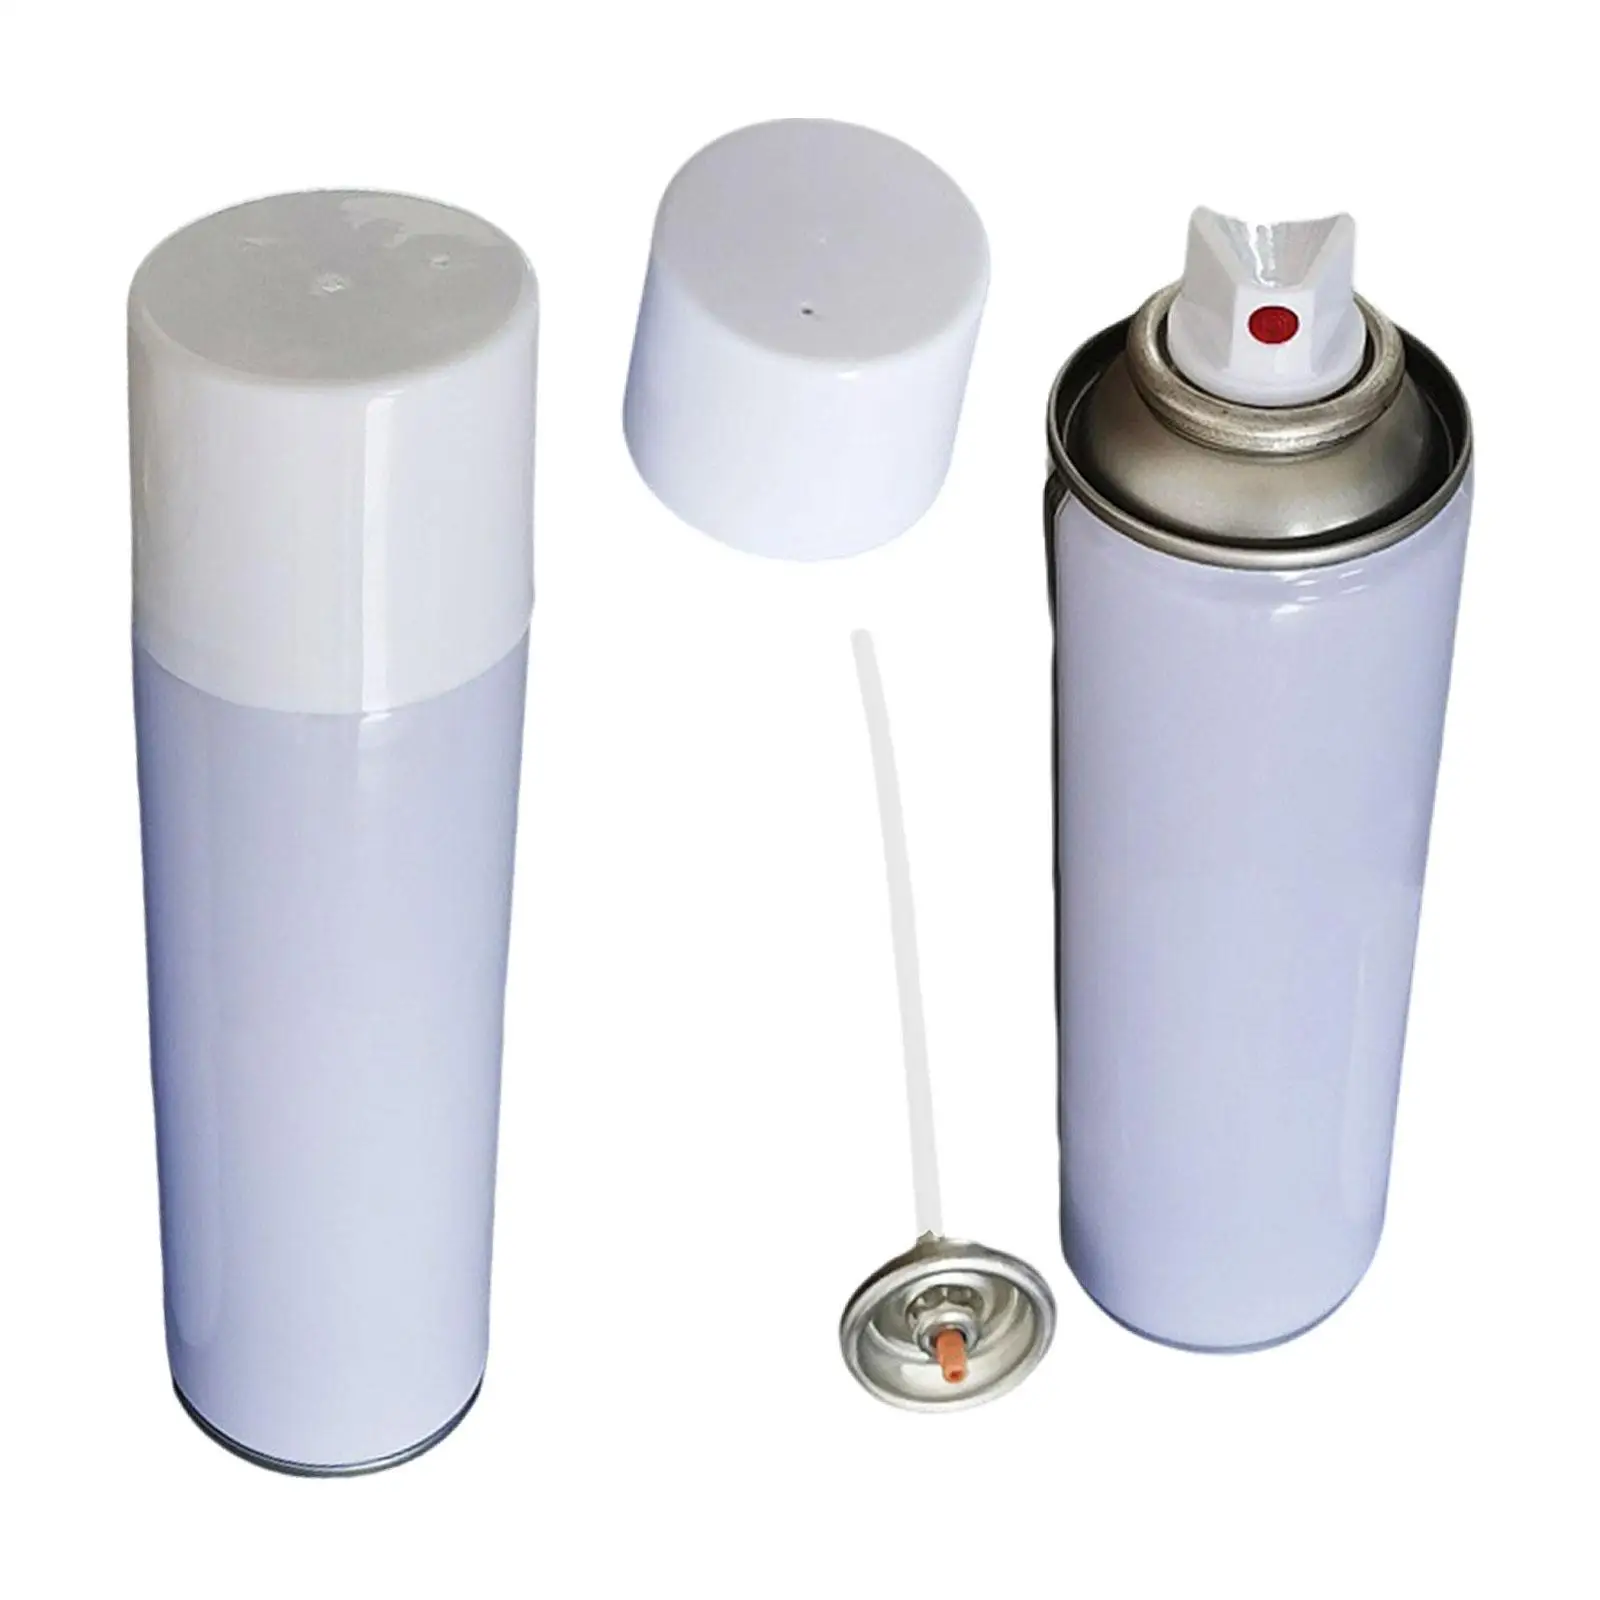 Spray Can 300 ml Liquid Empty Metal Storage Leakproof Refillable Application Portable Air Canister Spray Paint Can Aerosol Can